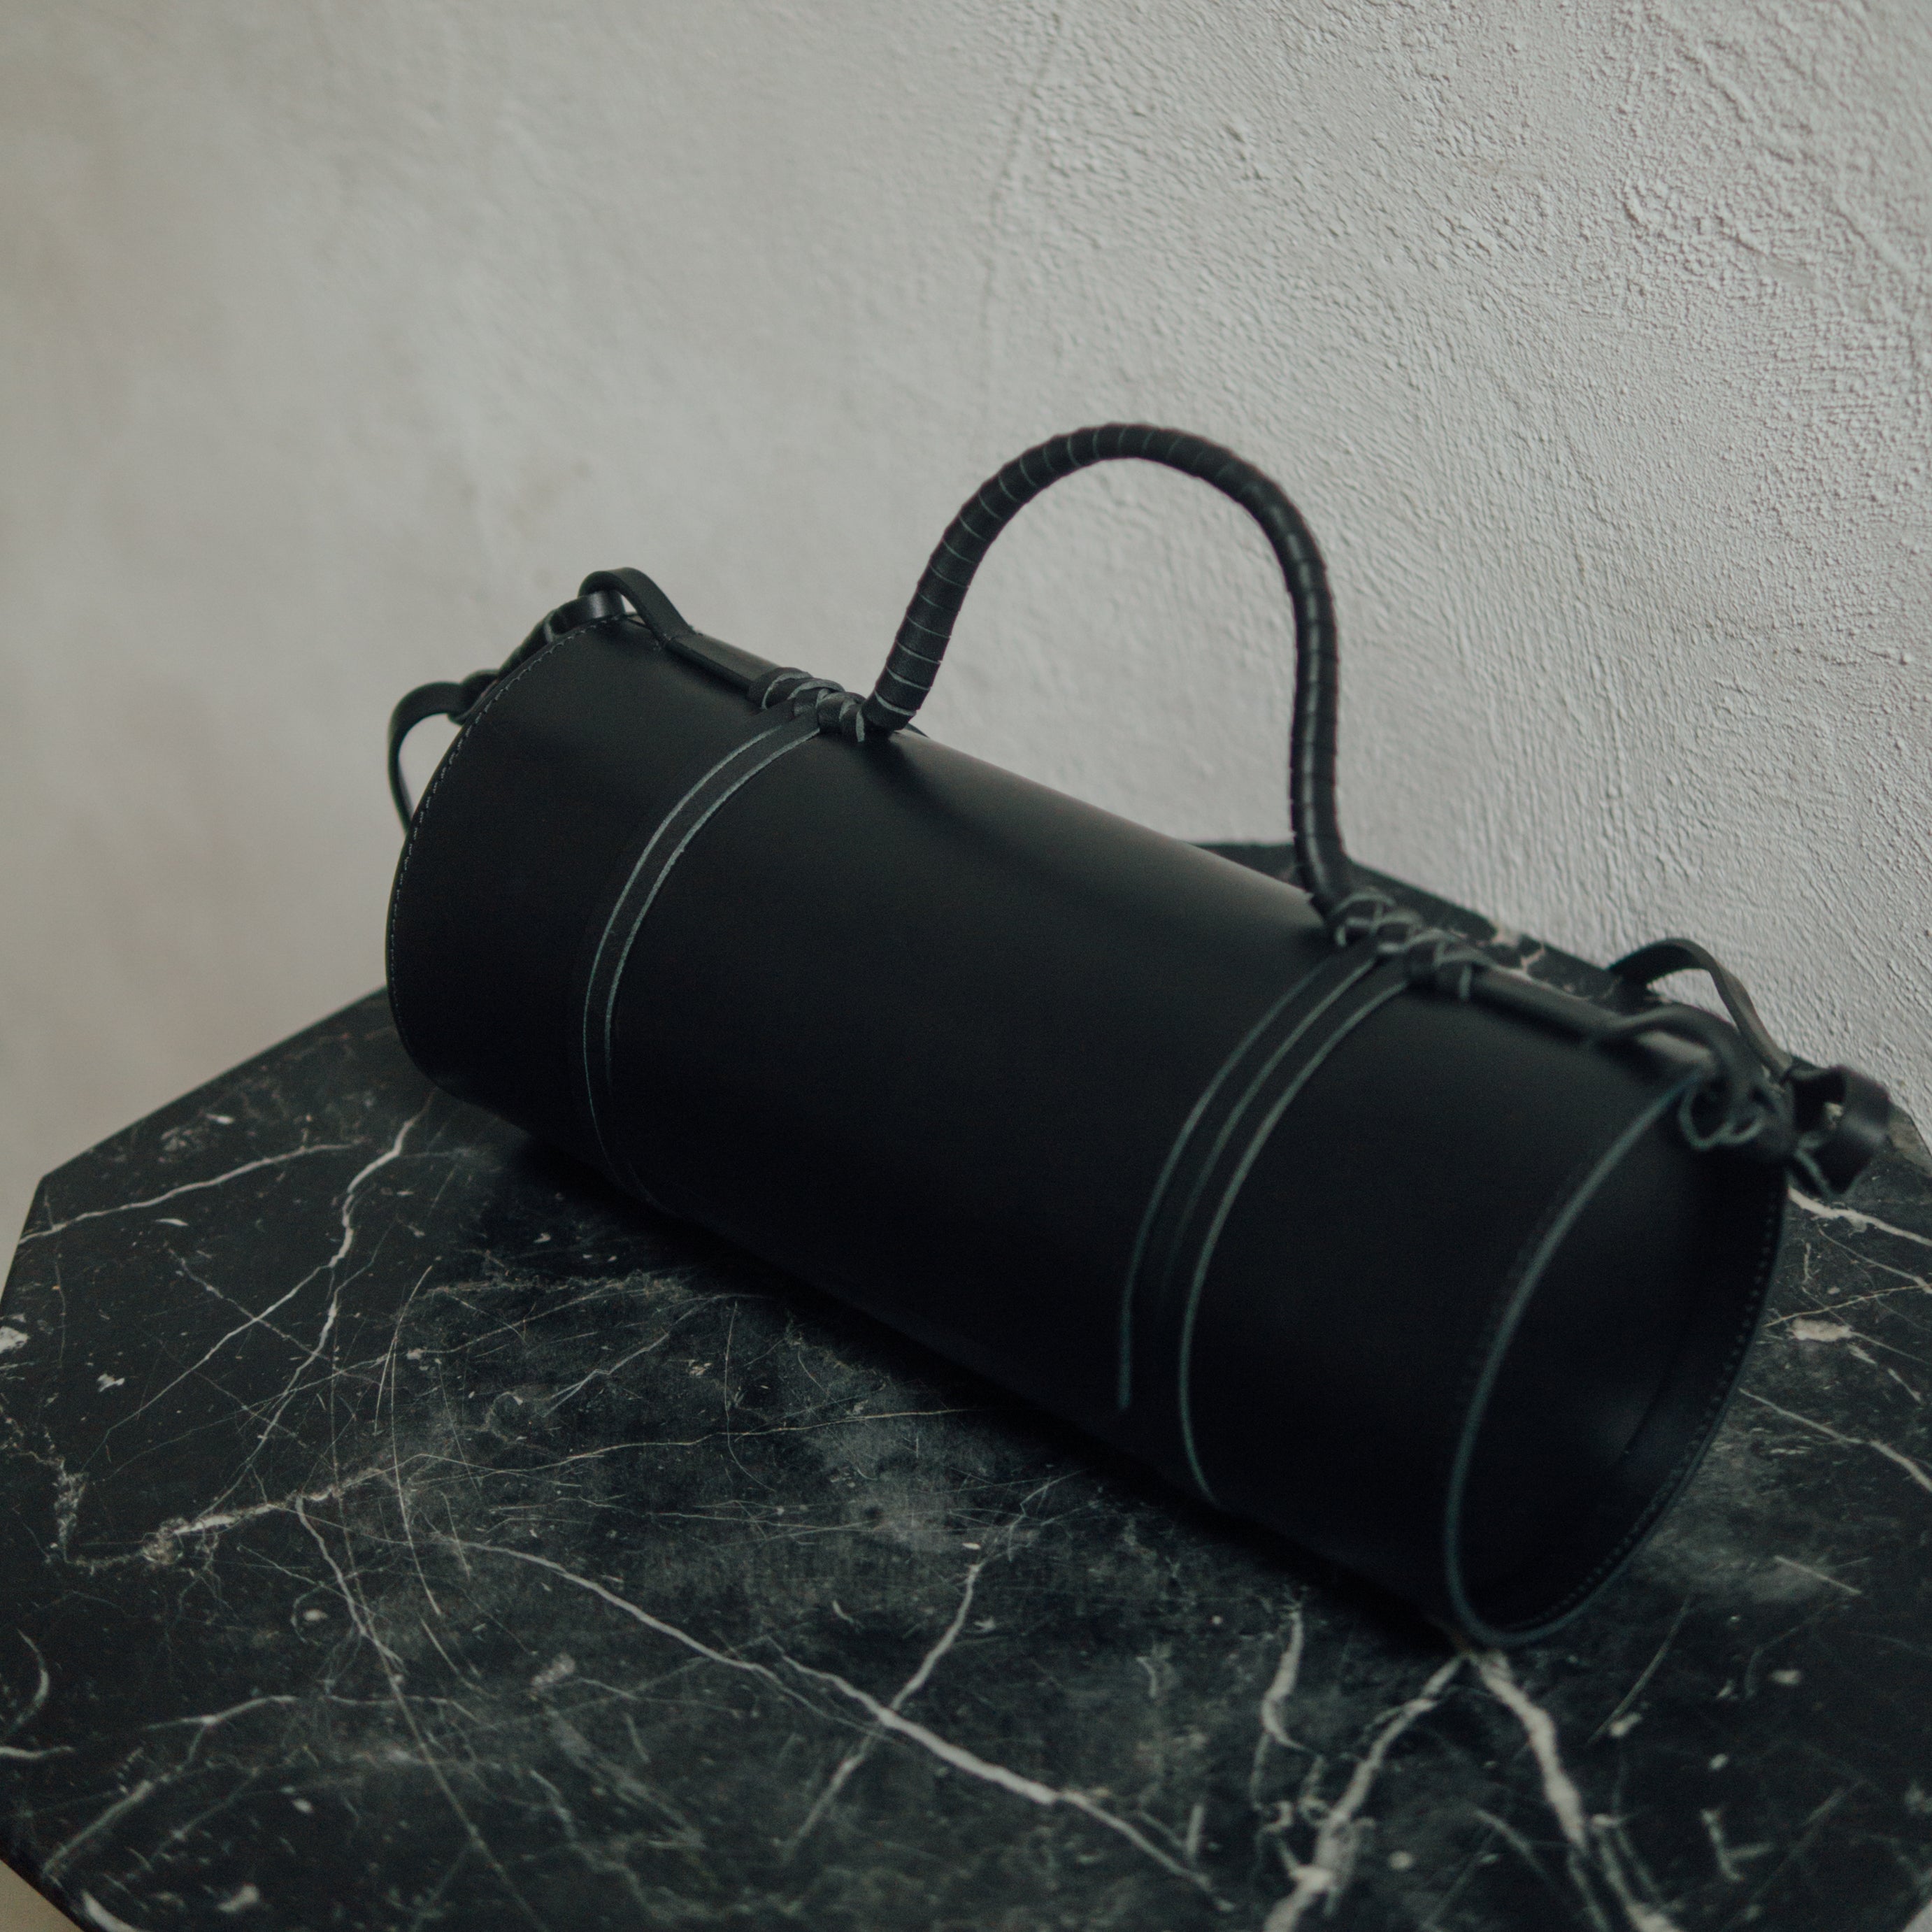 Woven Bamboo Bag in All-Black